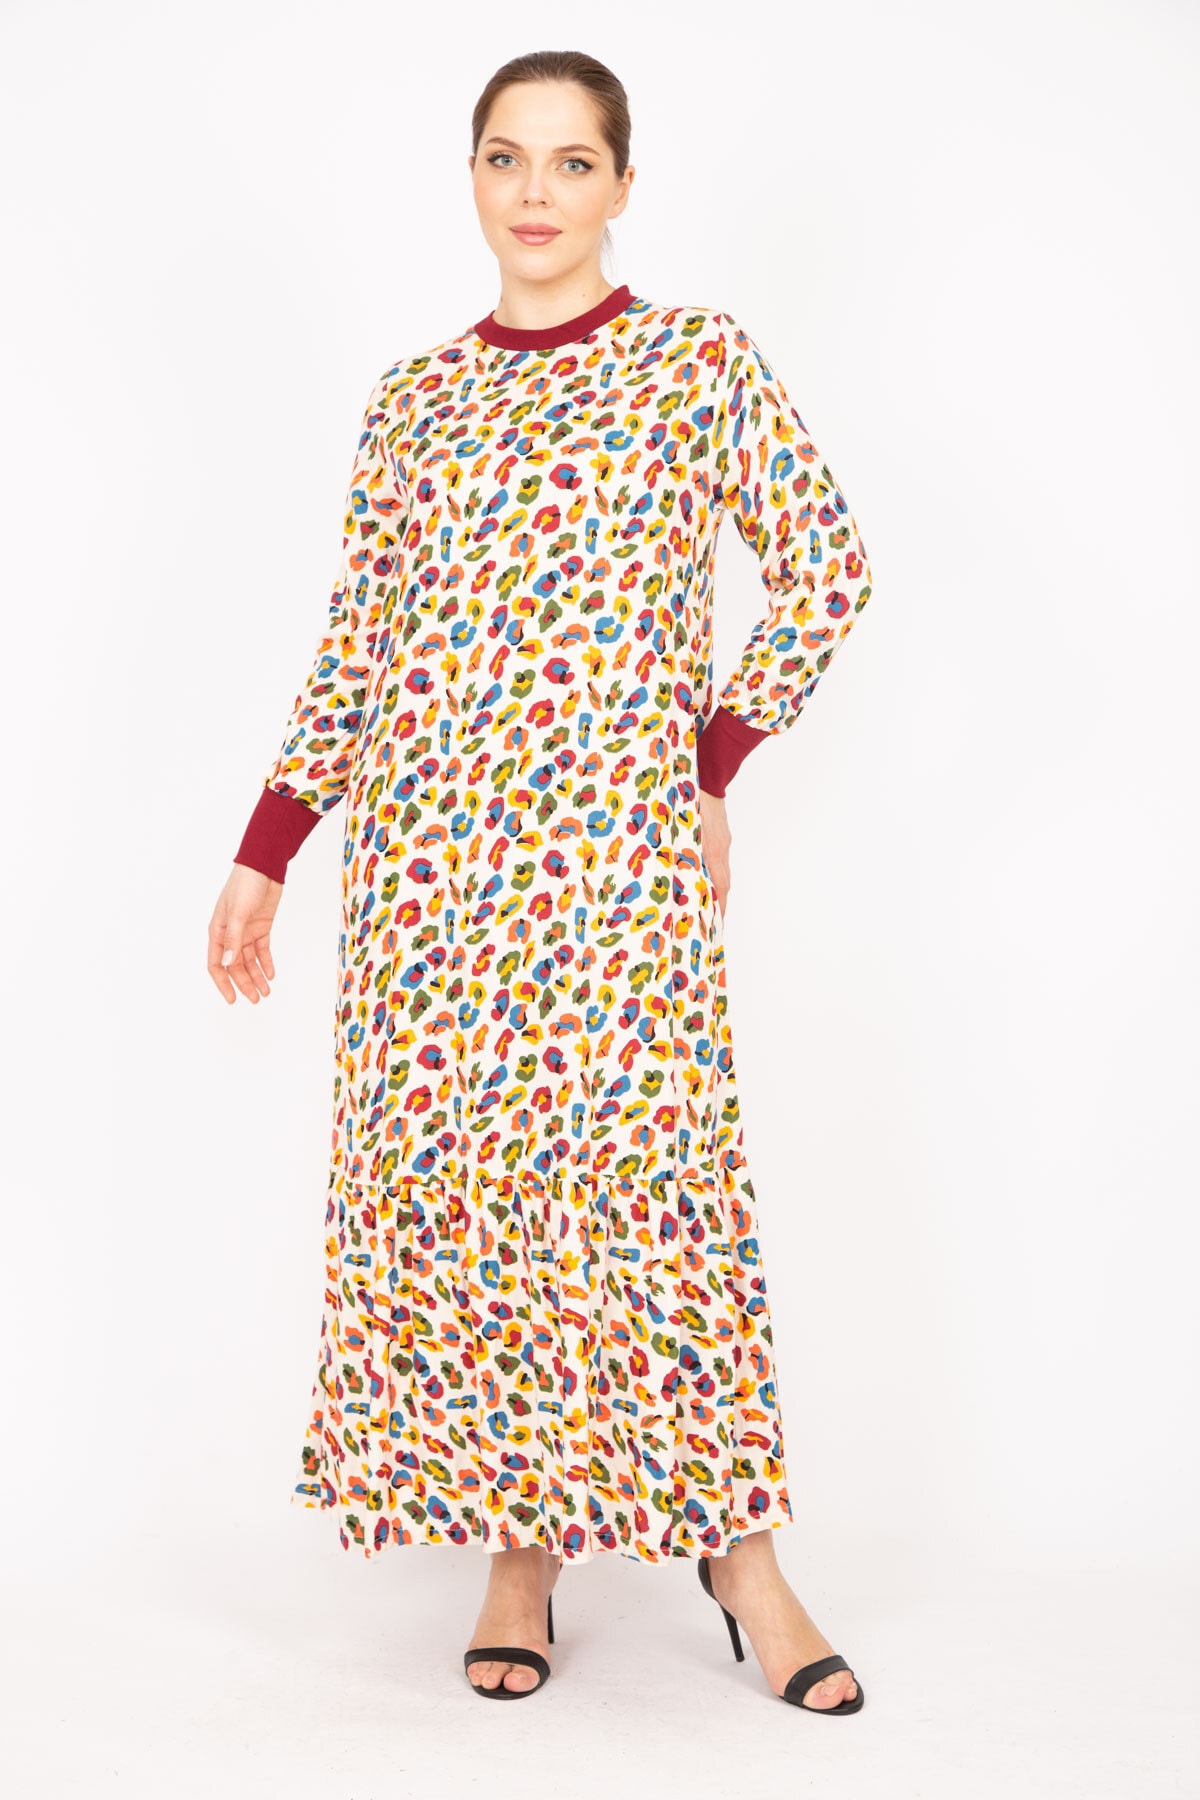 Şans Women's Colorful Plus Size Woven Viscose Fabric Long Dress With Ribbed Collar And Sleeves